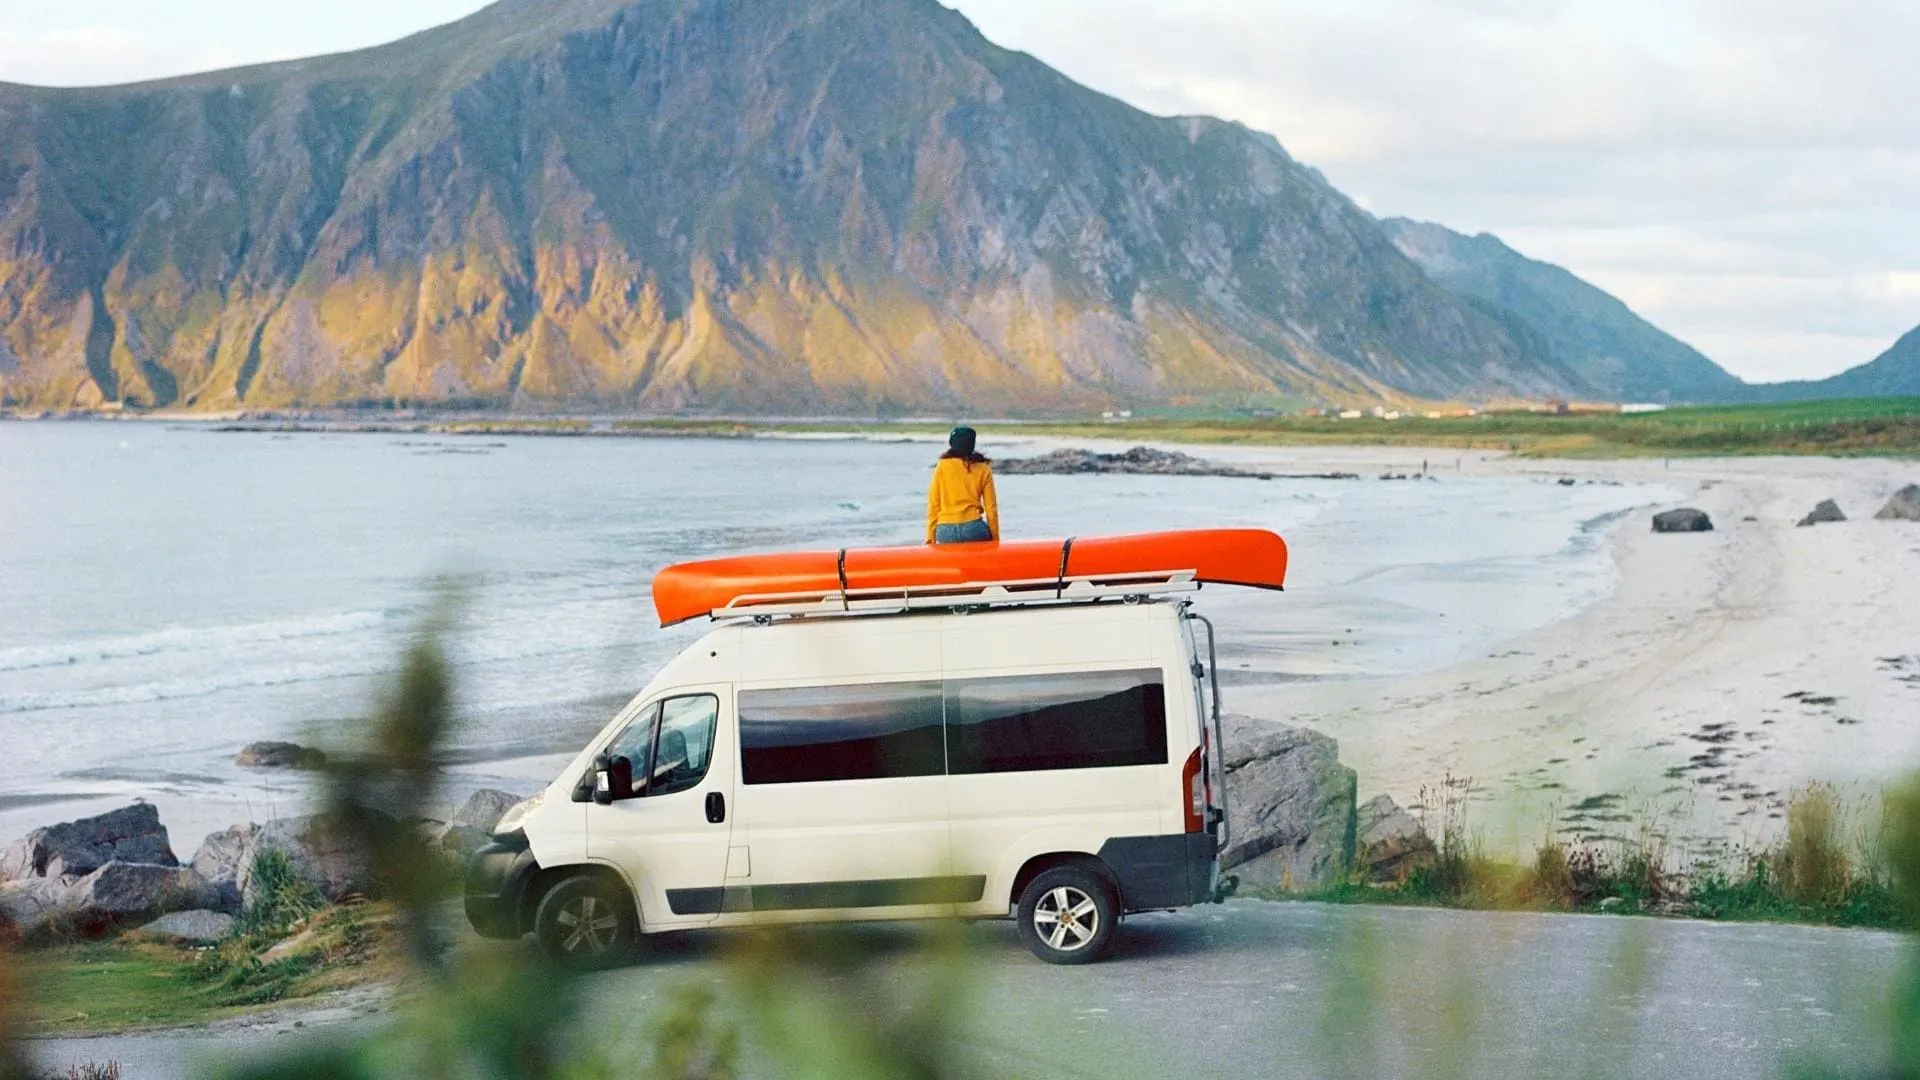 Photo of a Class B RV parked by the water - the ability to park anywhere is among the benefits of smaller RVs